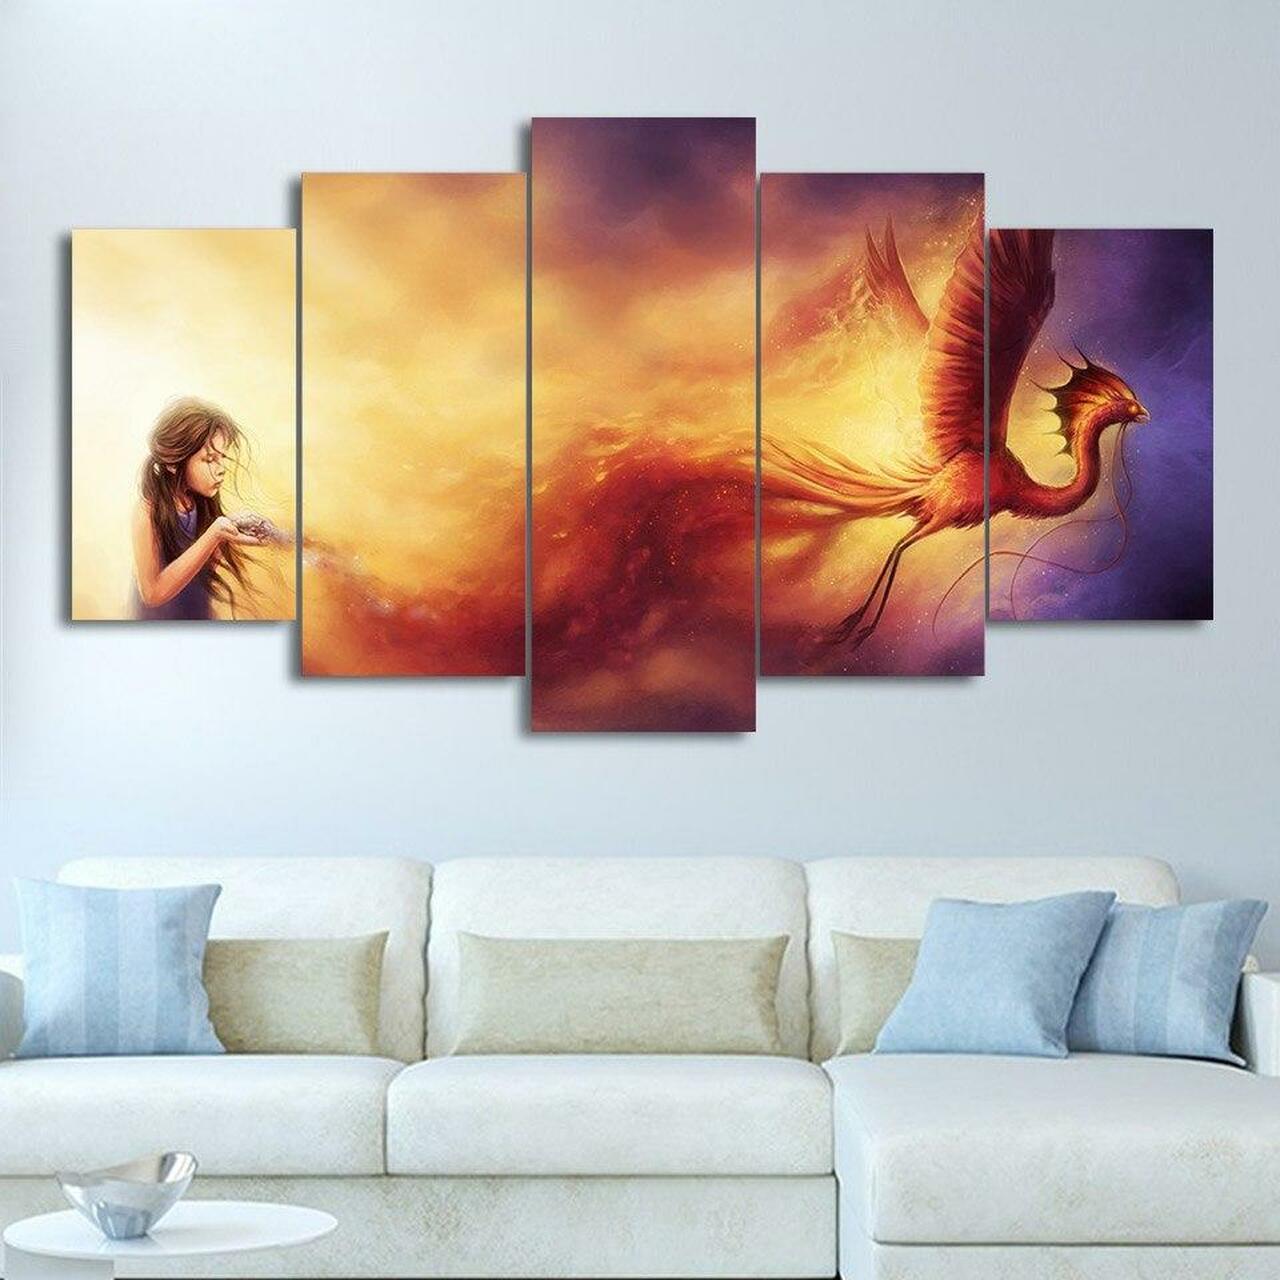 Born from the Ashes 5 Piece Canvas Art Wall Decor